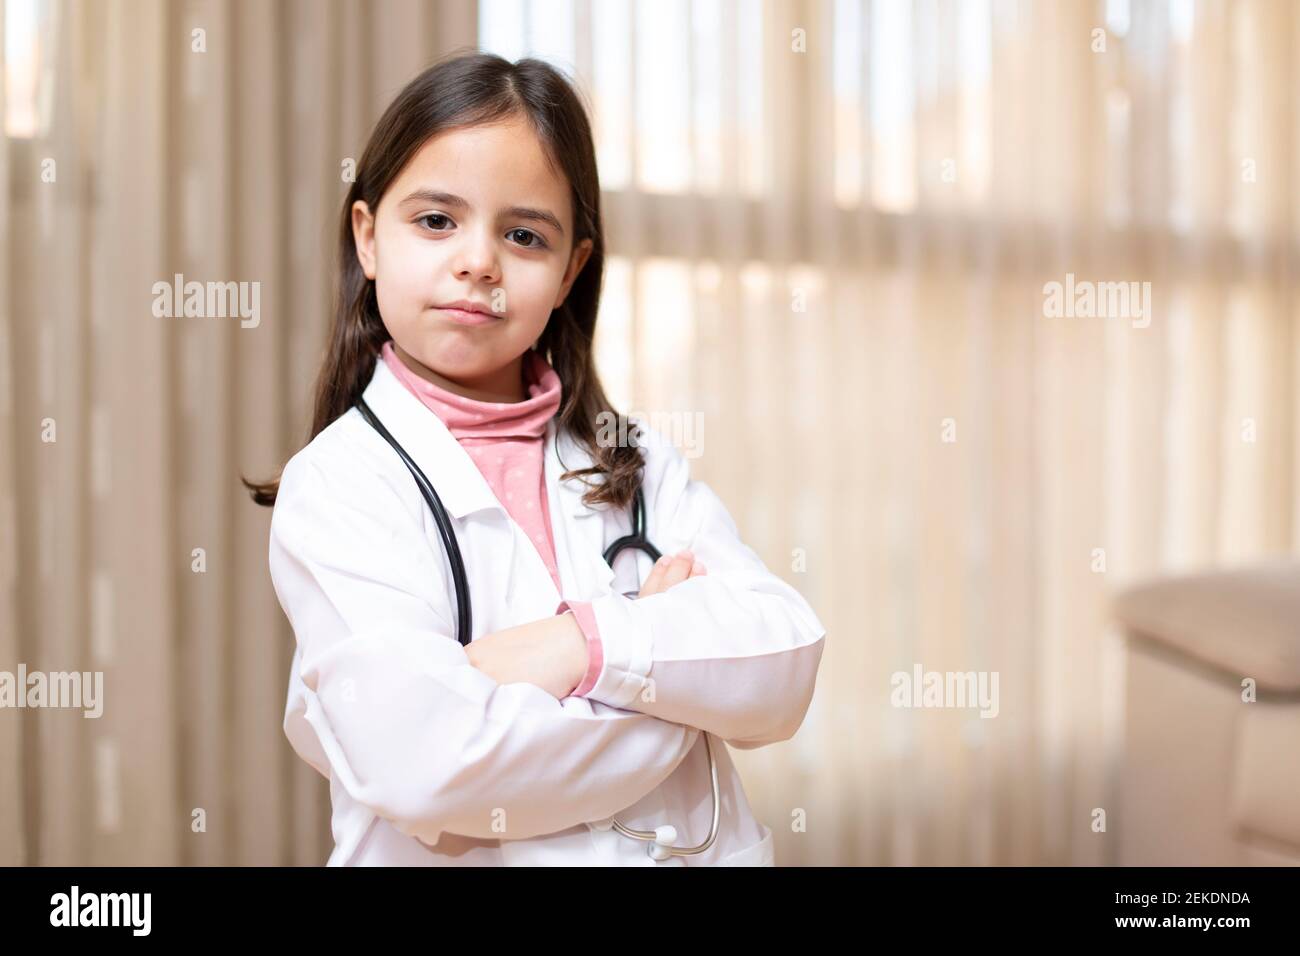 Portrait of little child in doctor's uniform posing with crossed arms and responsible attitude. Concept of medicine and health. Space for text. Stock Photo